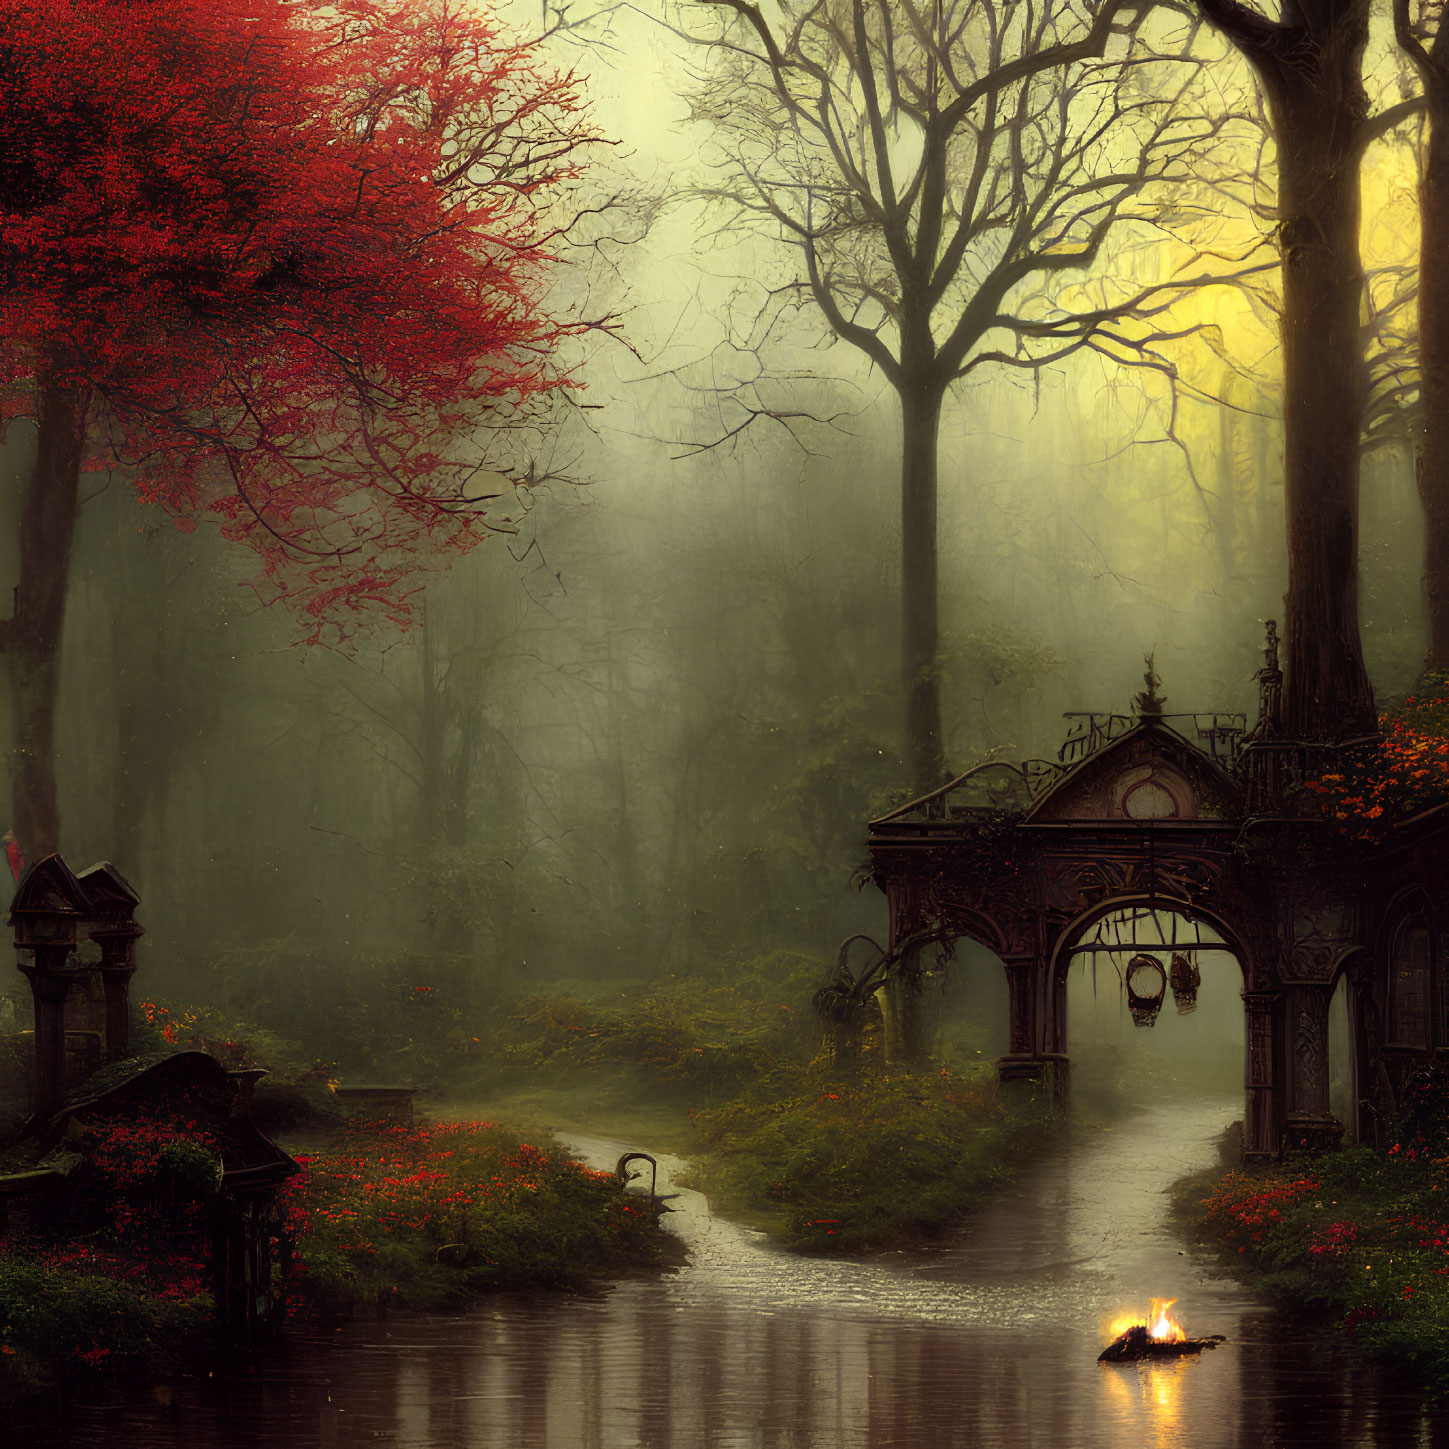 Misty forest scene with red tree, gazebo, river, and swan at twilight